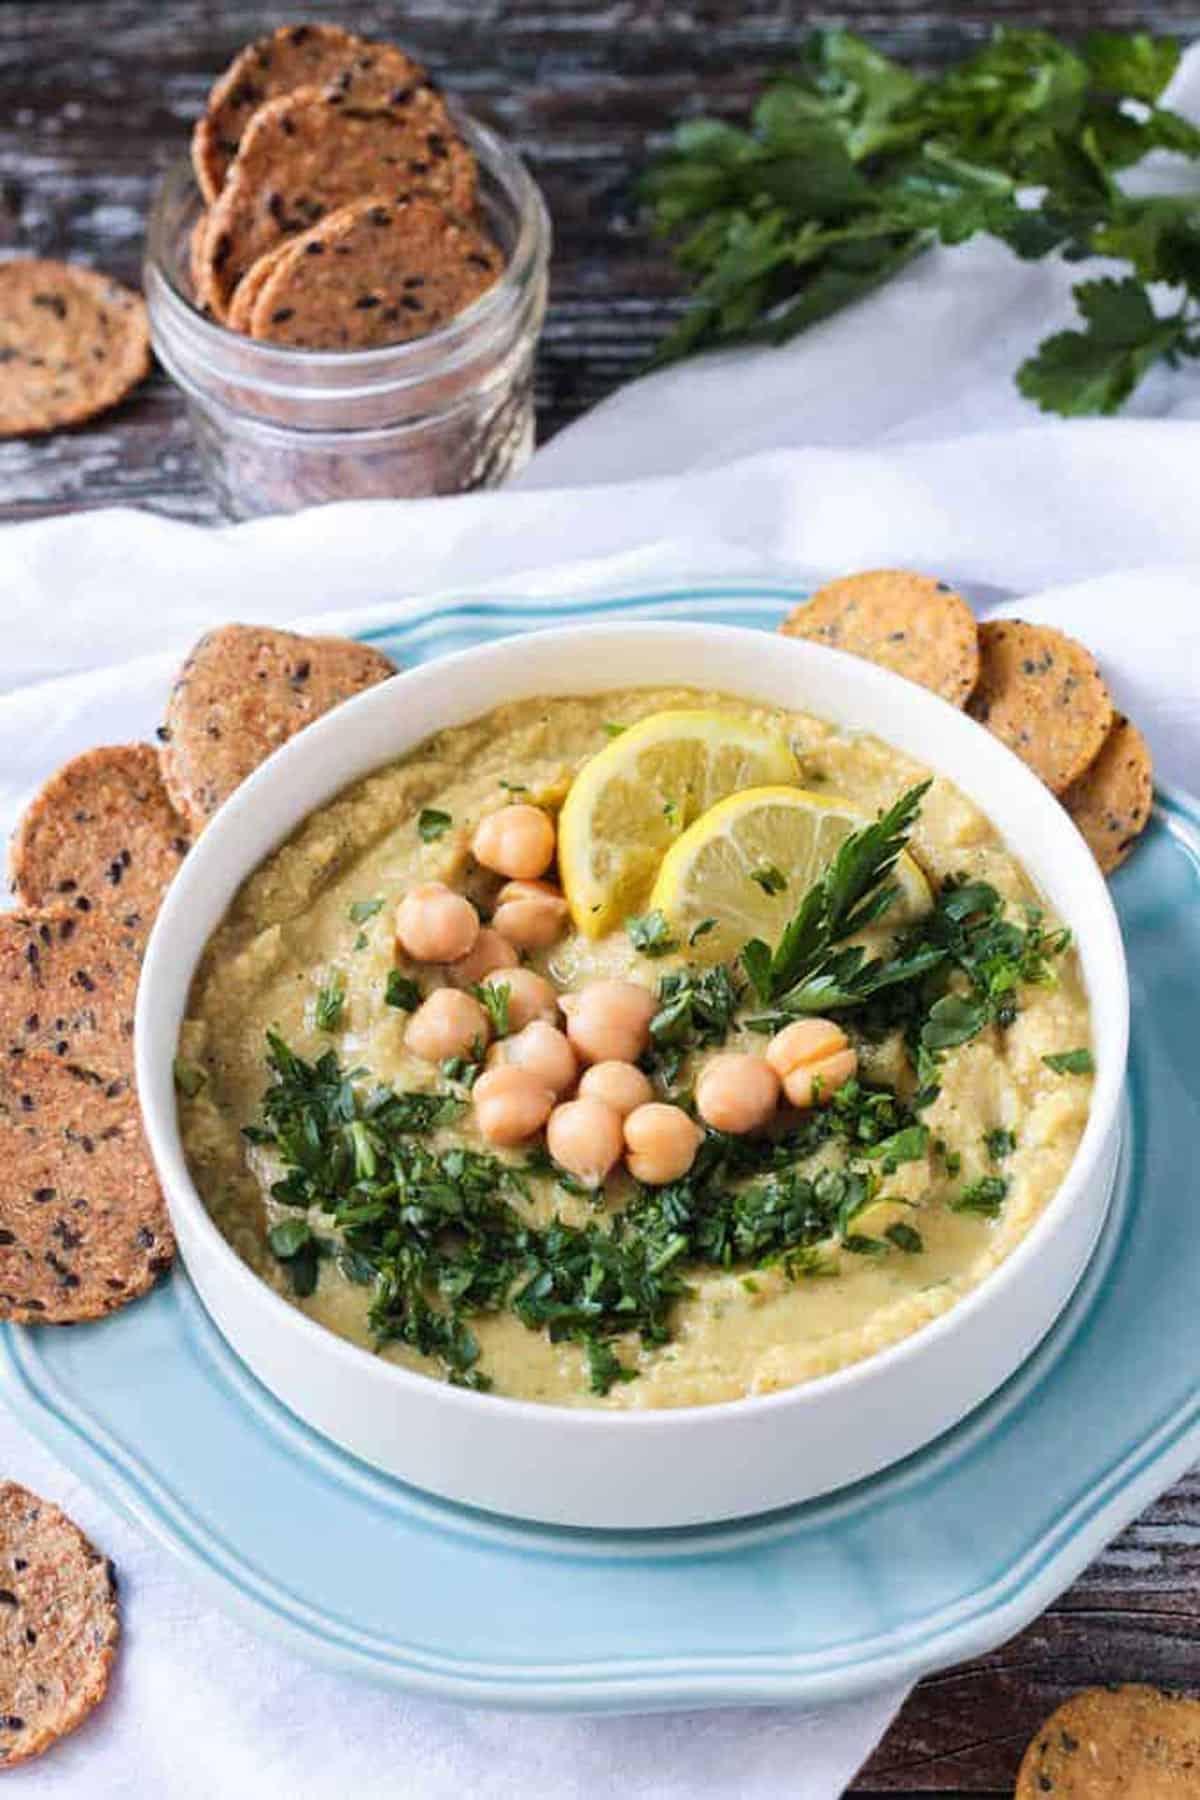 Hummus recipe without tahini garnished with chopped parsley and two lemon slices.